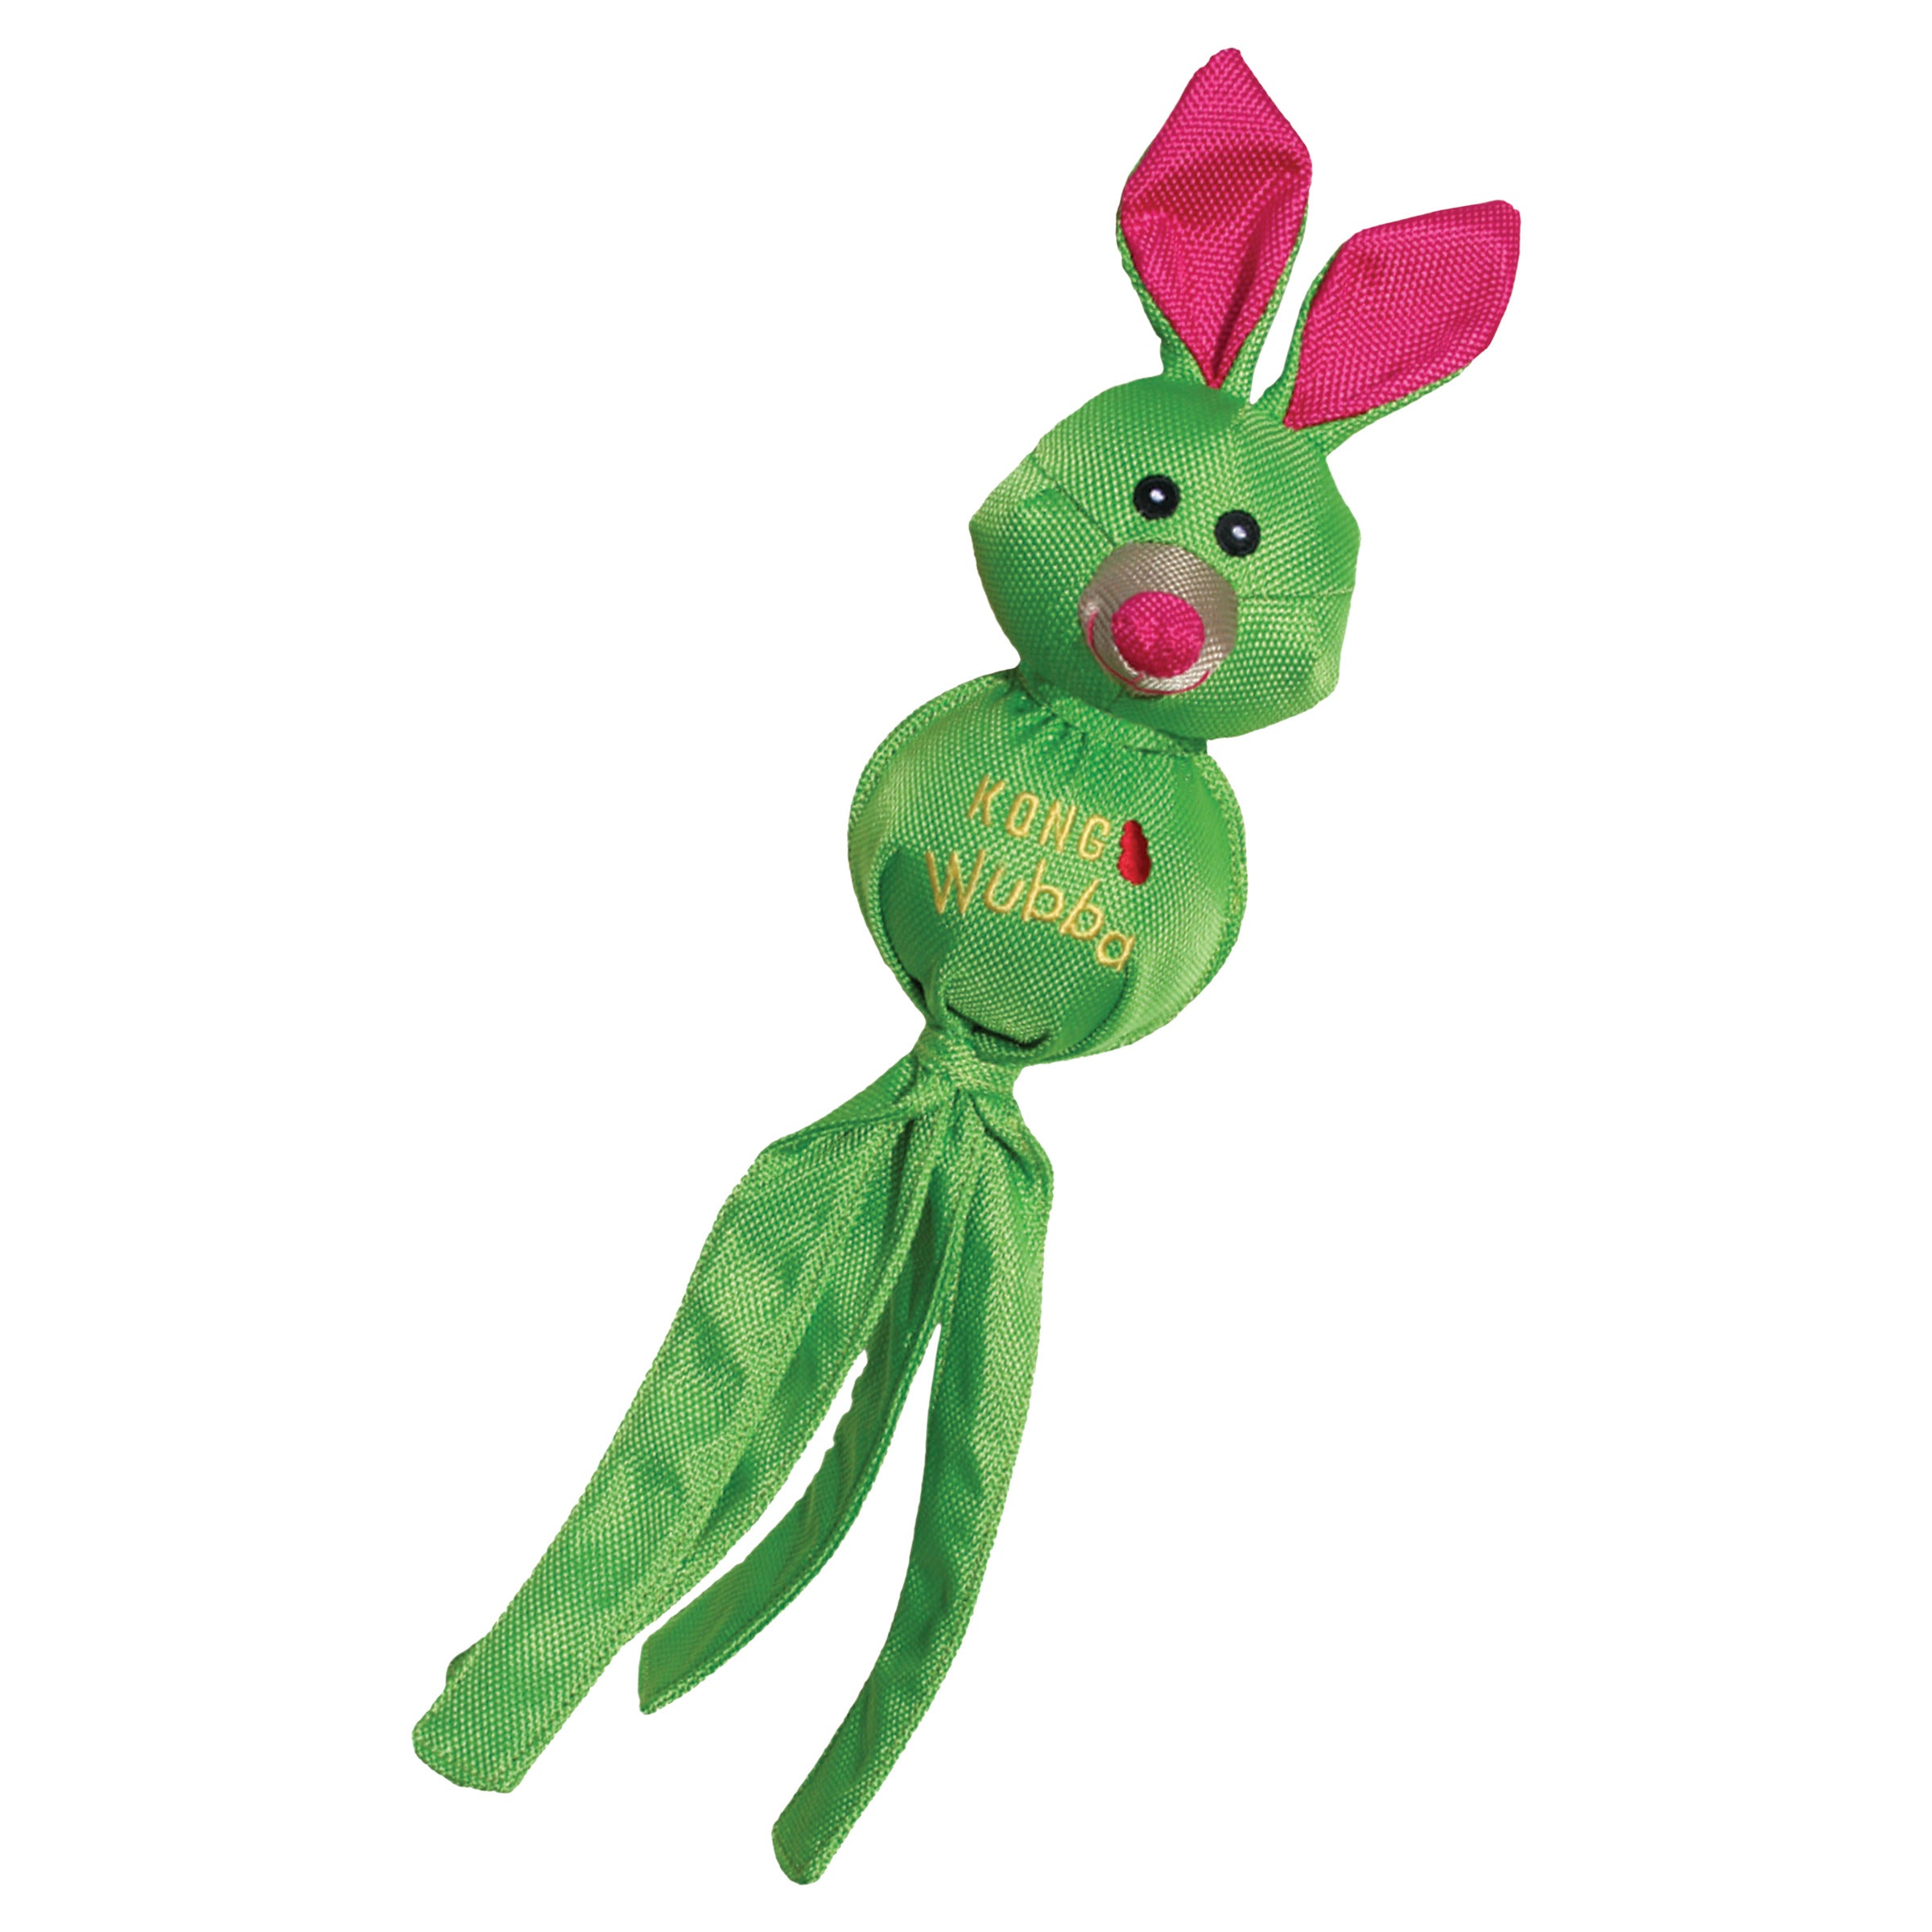 A detailed image of the Kong Wubba Ballistic Friends toy in the shape of a green bunny, showcasing its durable reinforced nylon fabric, long tails, and engaging design.